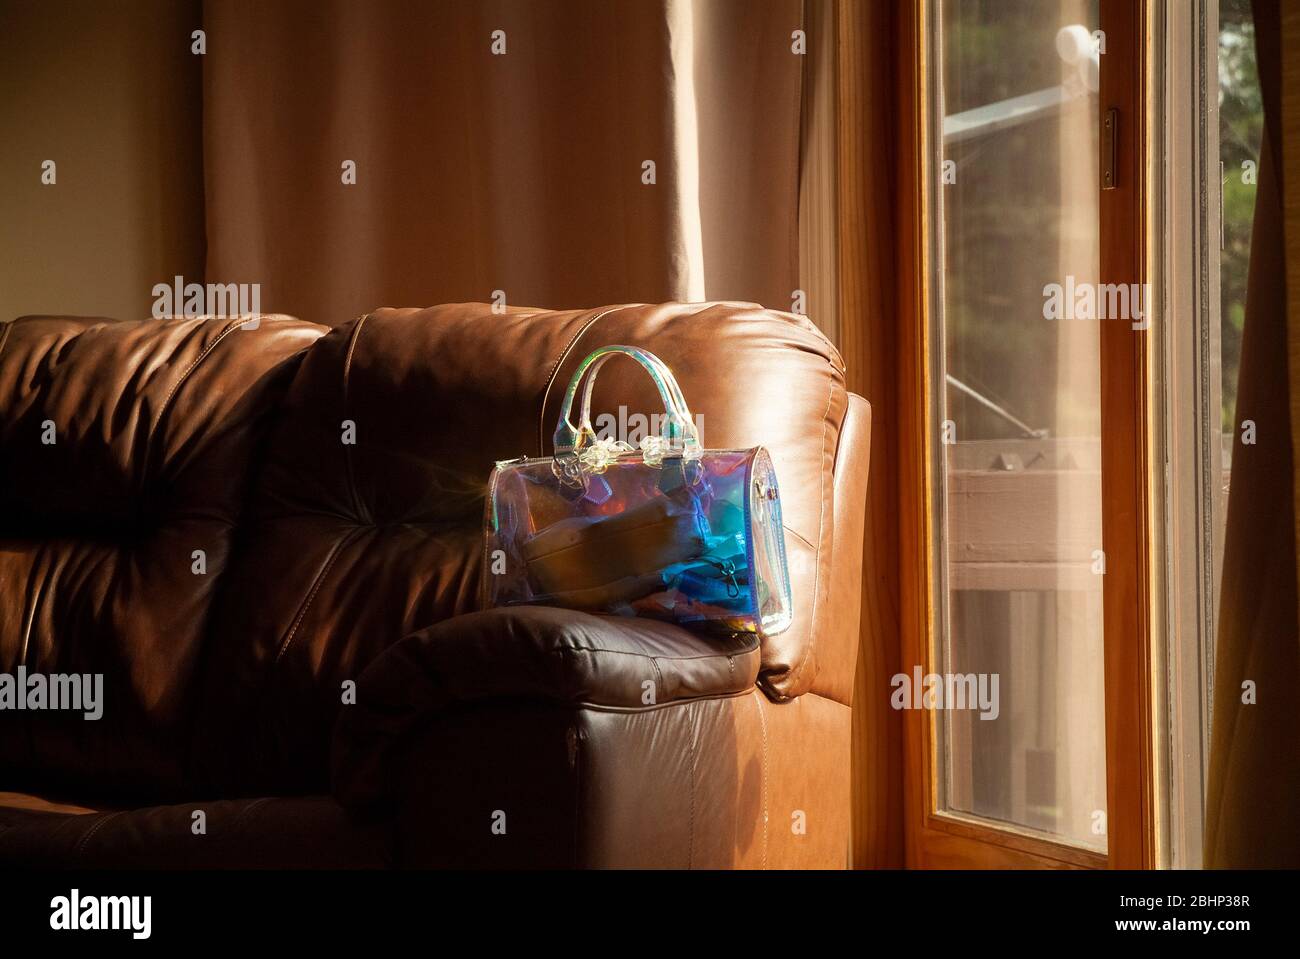 REMINISCENT: A woman's transparent purse rest on the arm rest of a sofa in the living room of a residential home. Stock Photo